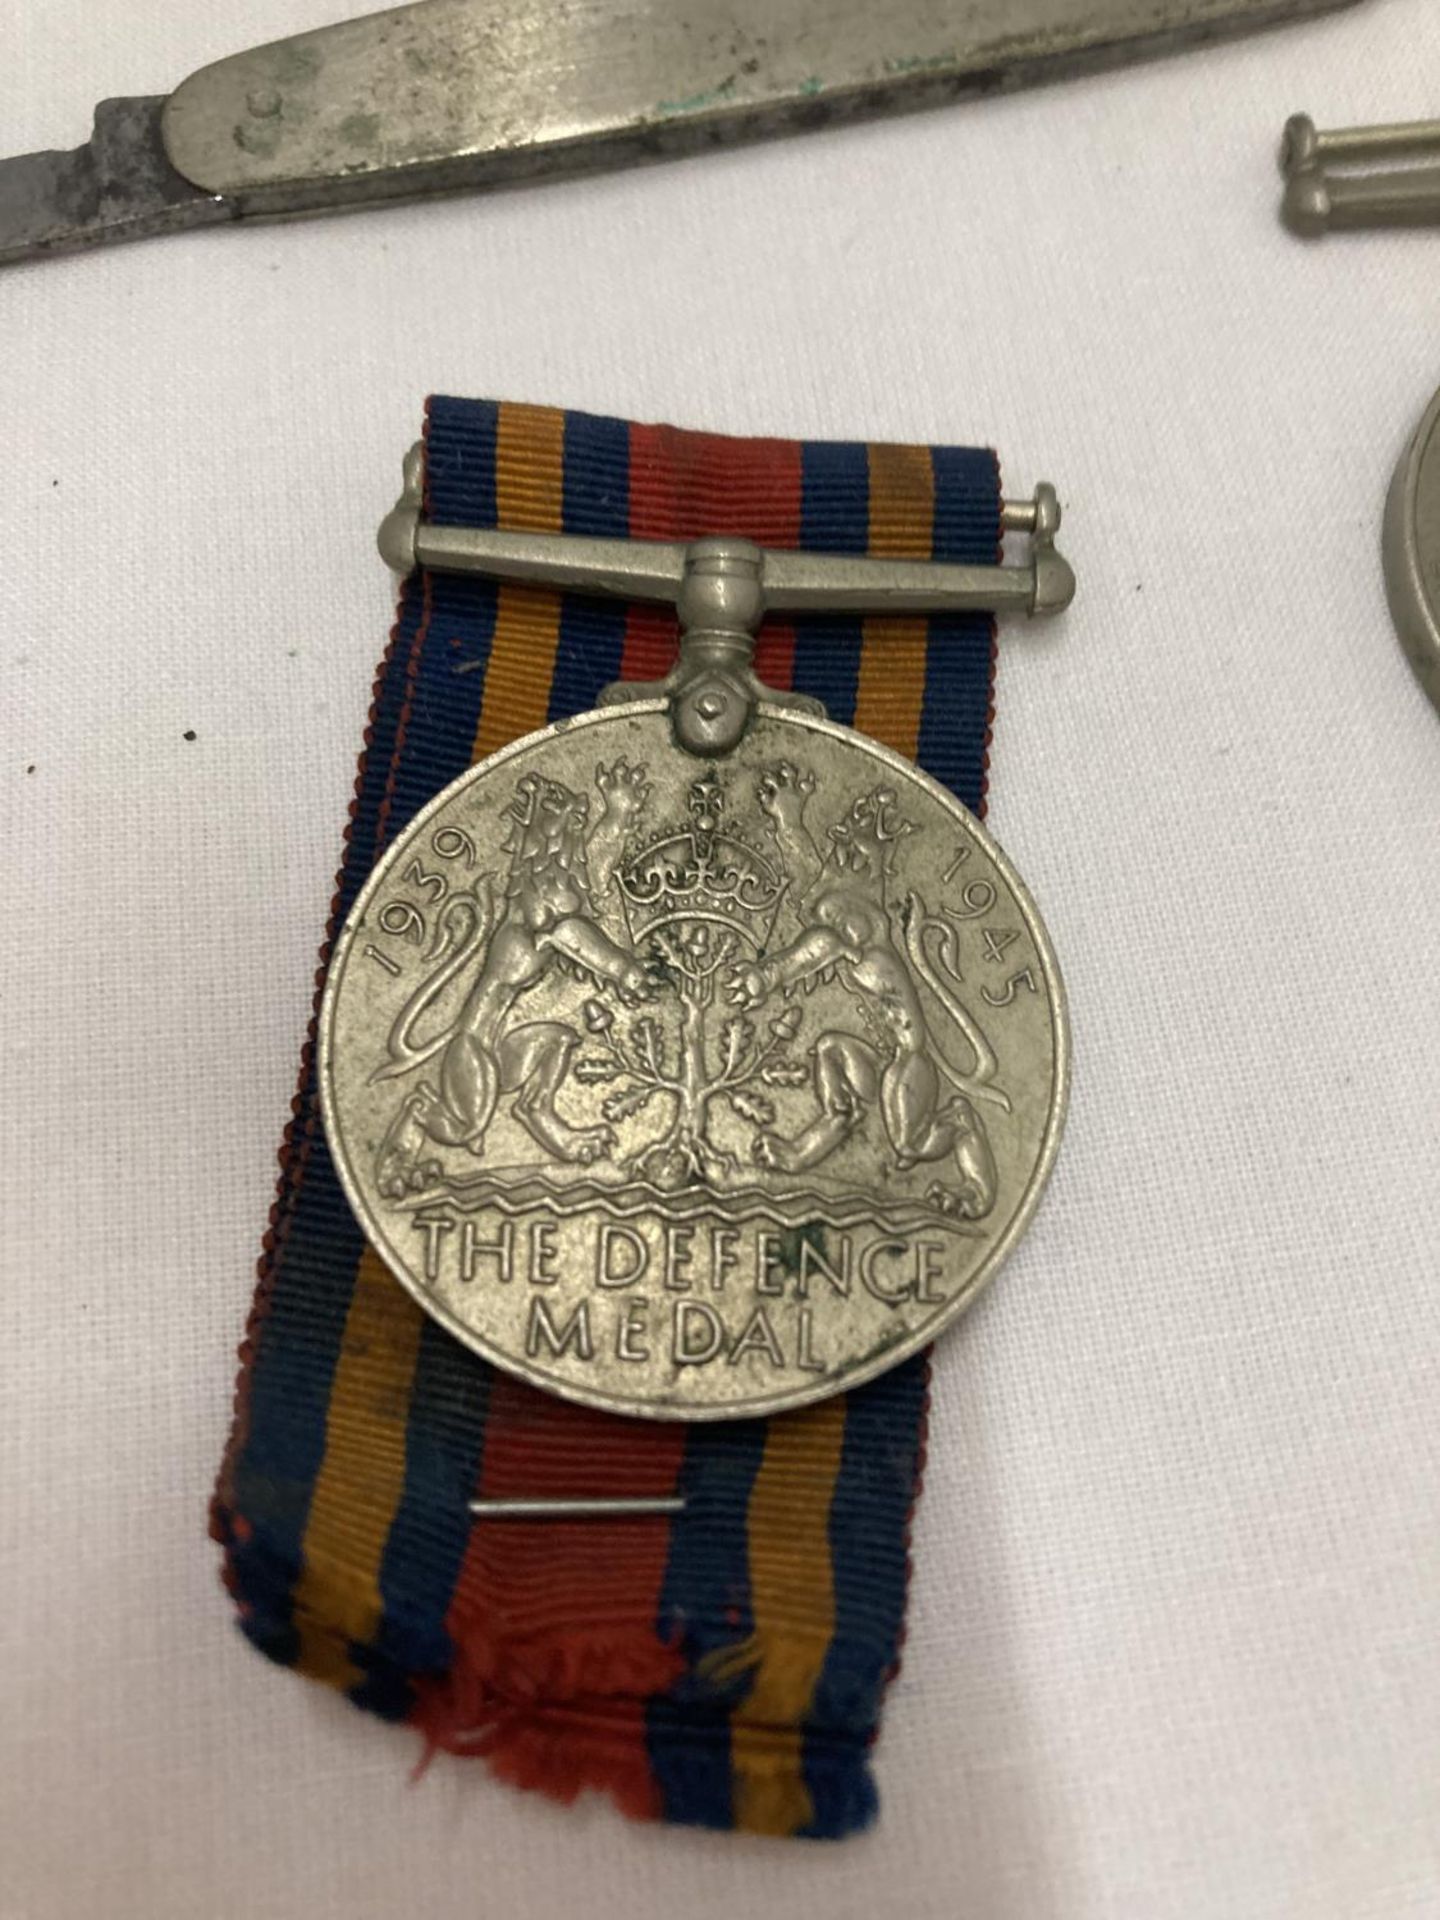 A 1939/45 MILITARY MEDAL, A DEFENCE MEDAL AND TWO PENKNIVES - Image 2 of 5